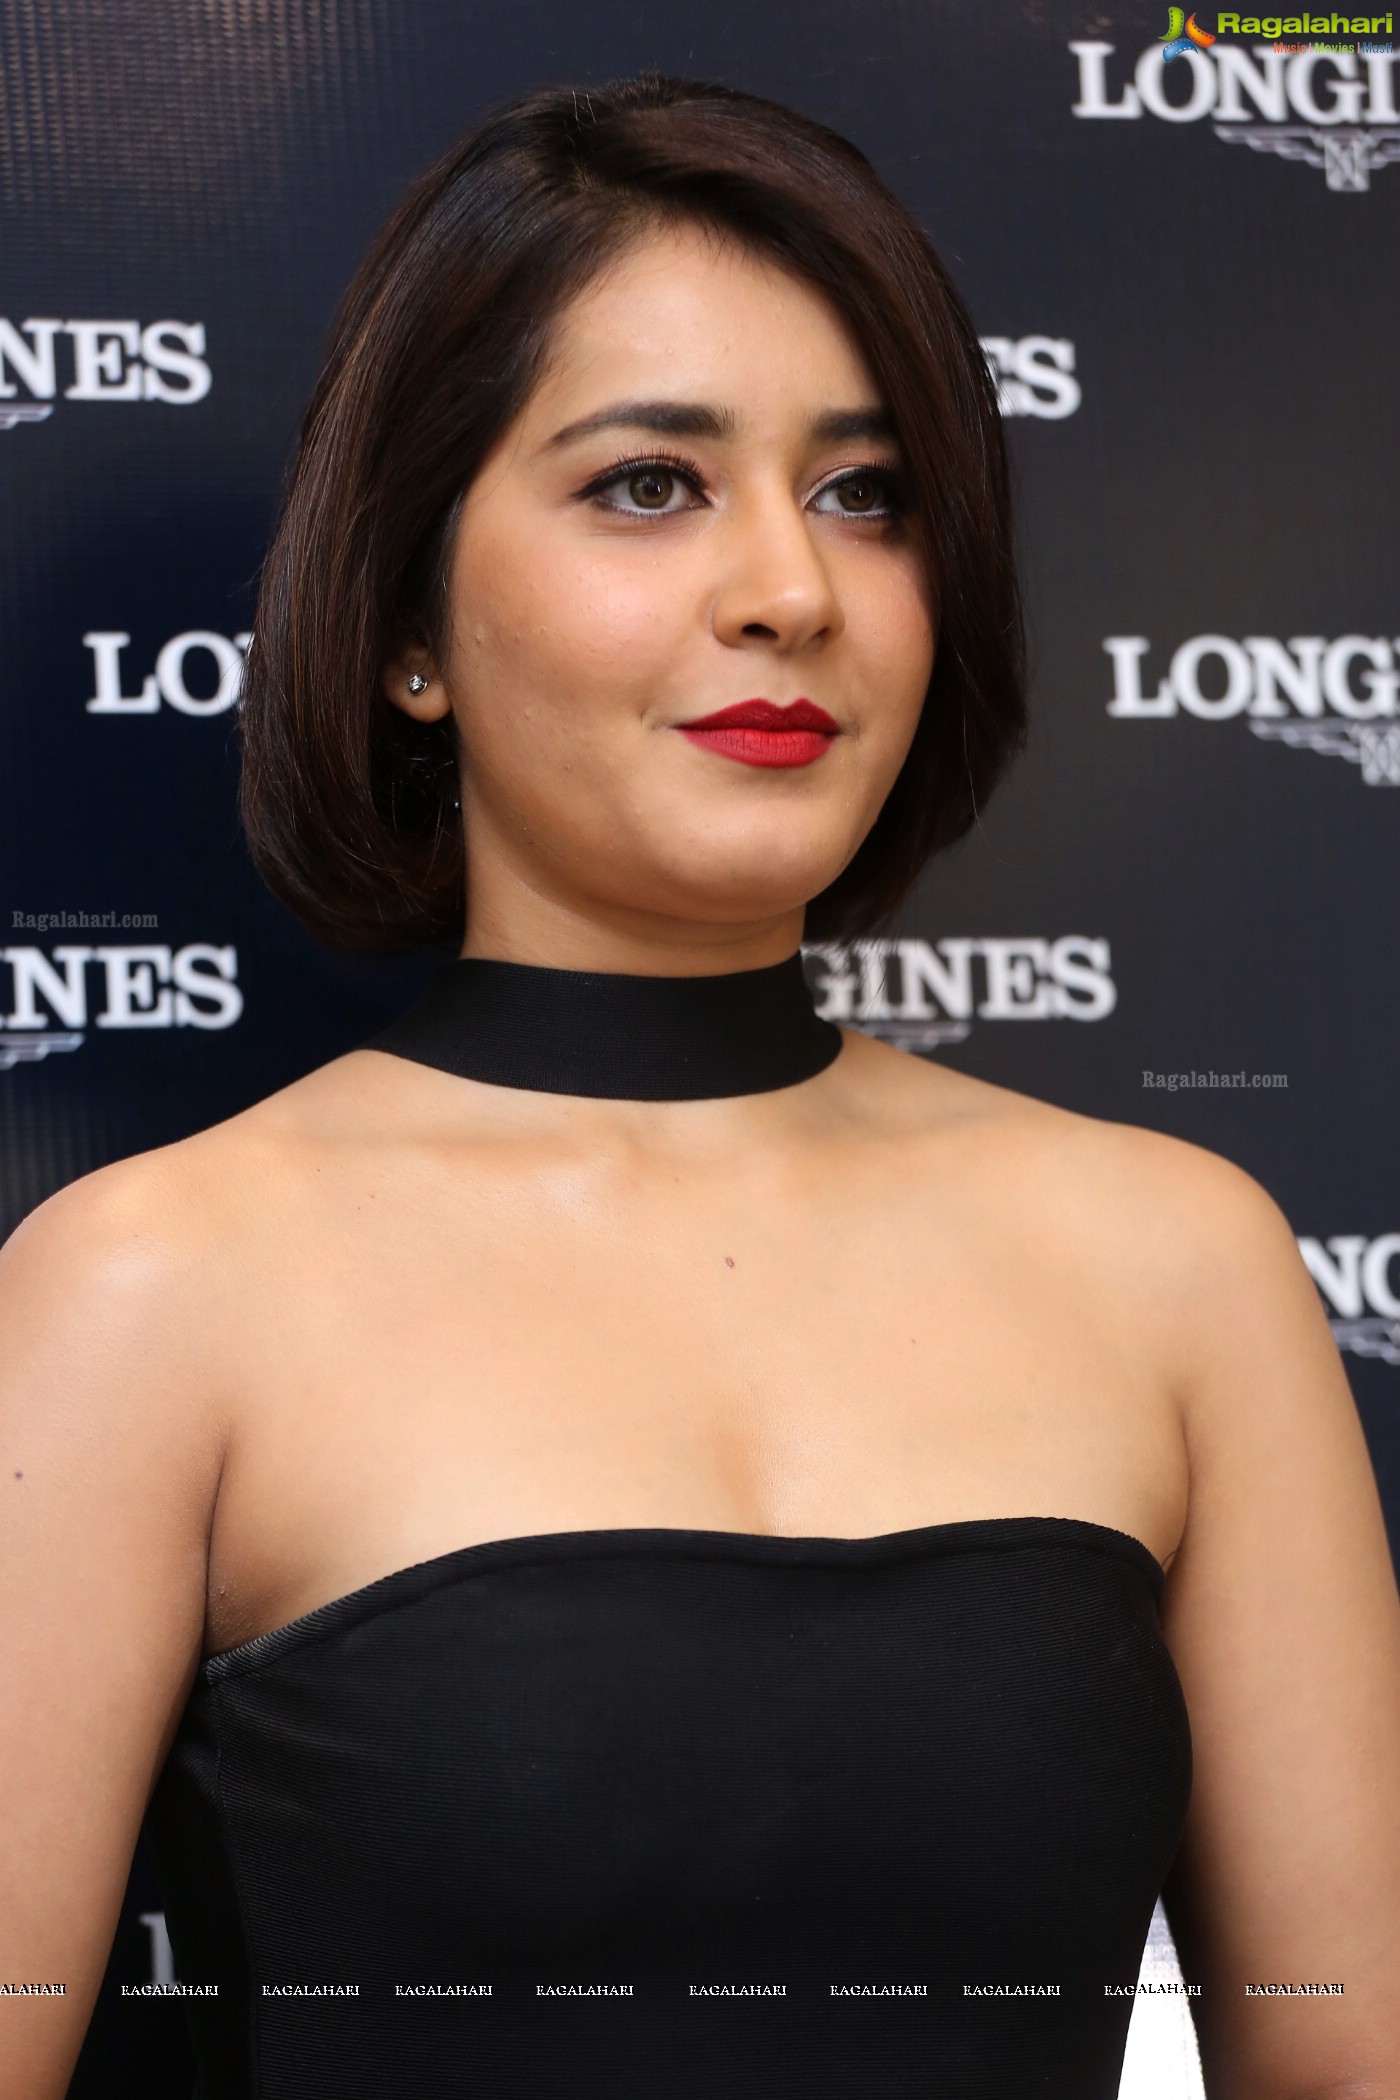 Raashi Khanna at Longines Boutique Exclusive HQ Photos,  Jubilee Hills, Hyderabad